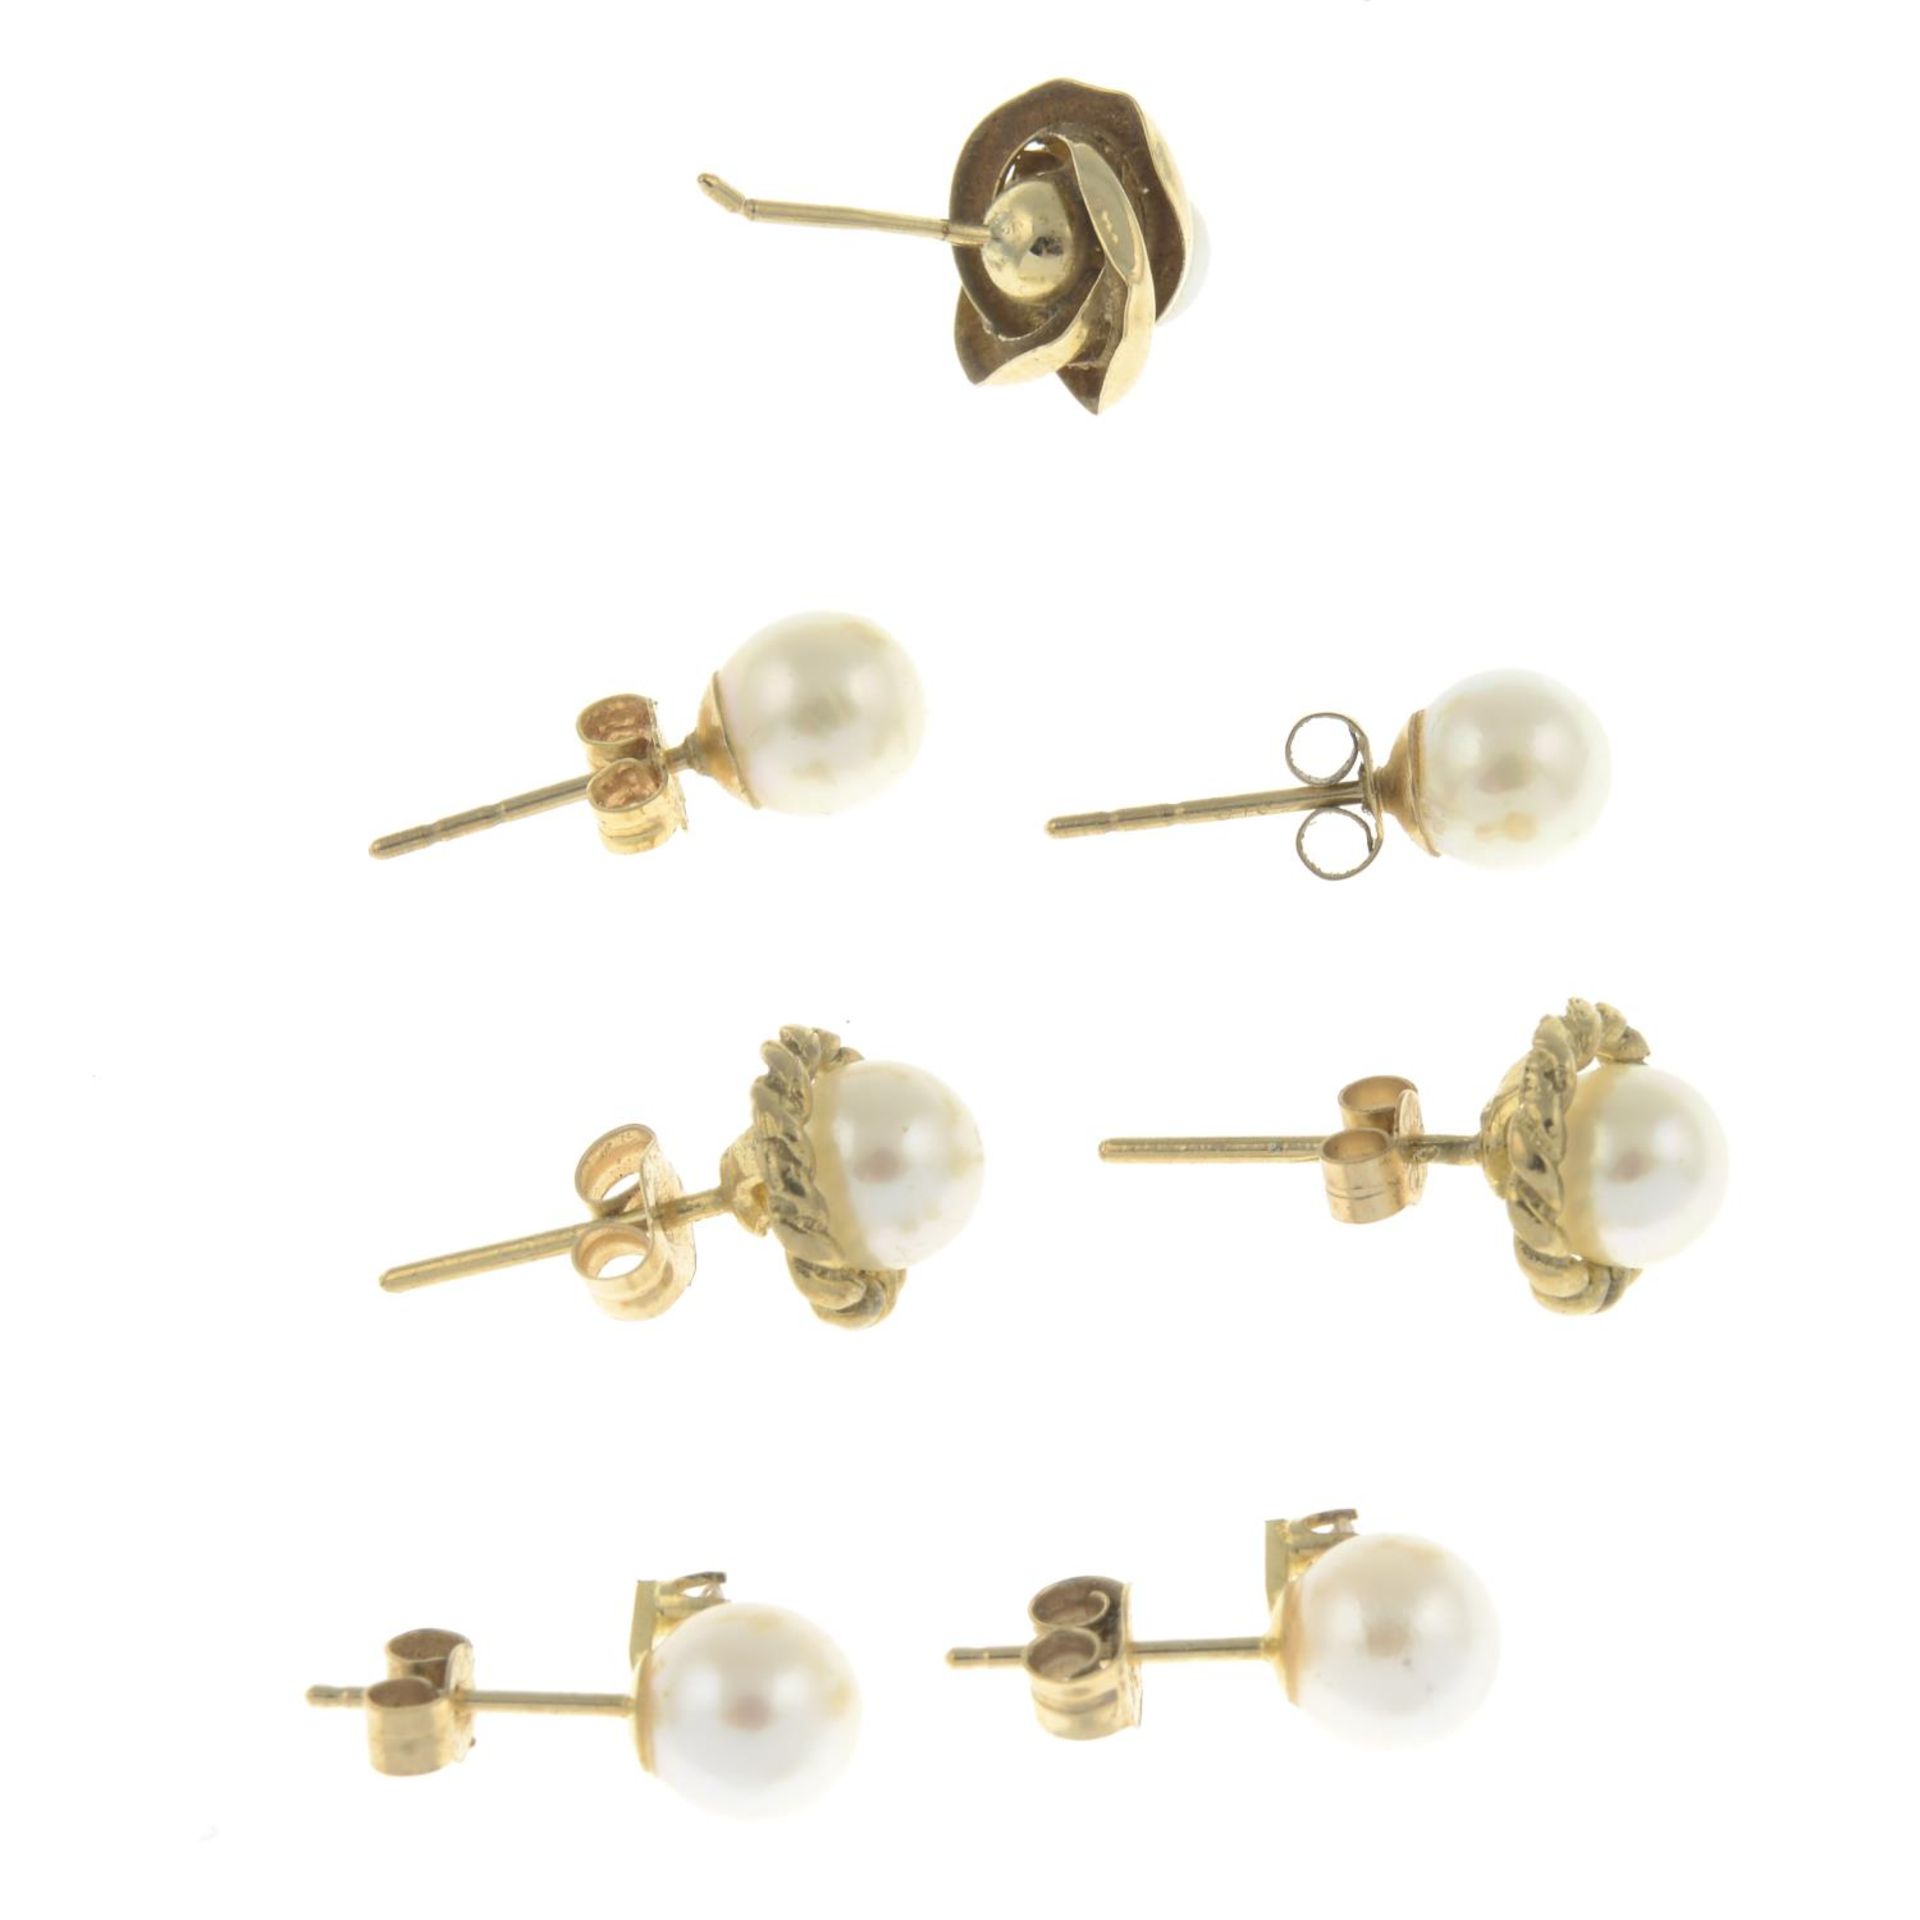 9ct gold cultured pearl single earring, hallmarks for 9ct gold, length 1cm, 0.4gm. - Bild 2 aus 2